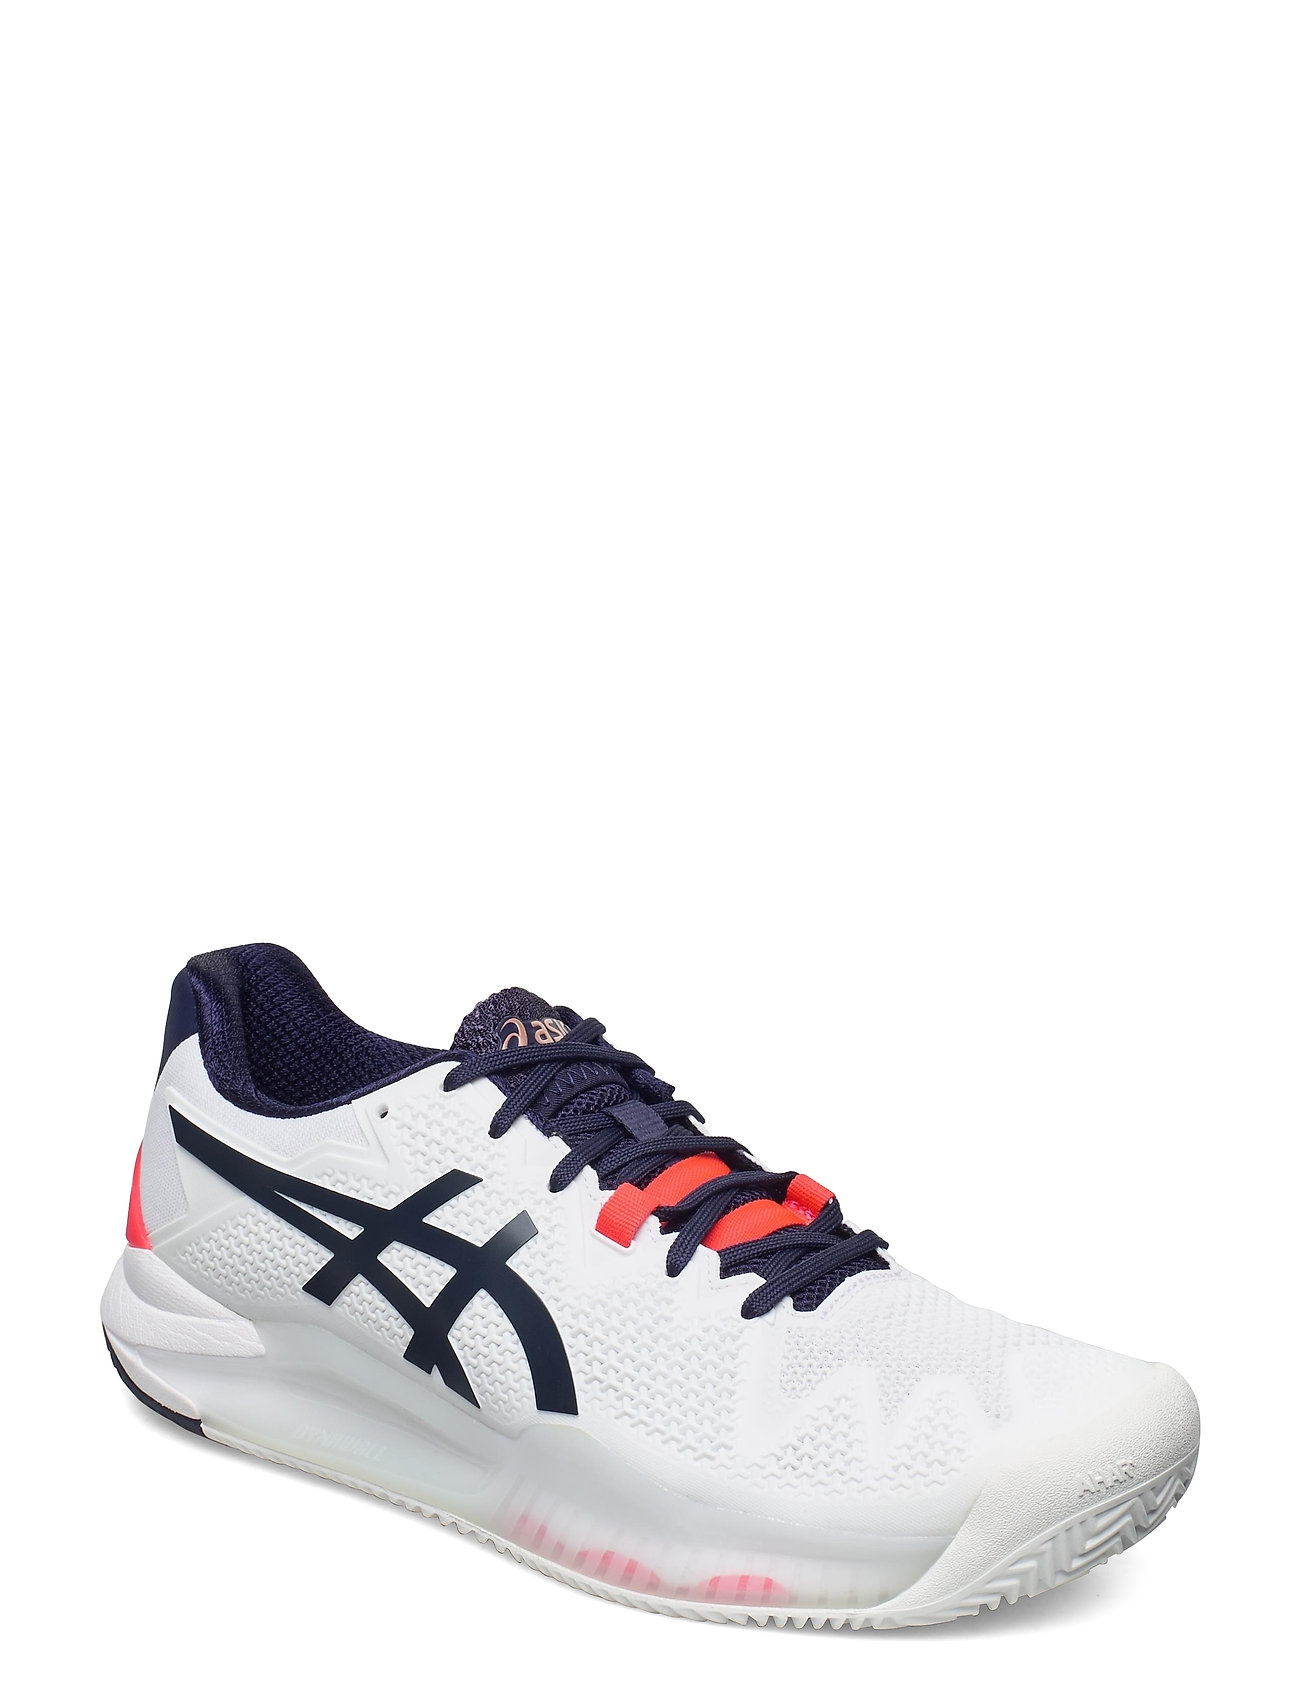 Gel-Resolution 8 Clay Shoes Sport Shoes Racketsports Shoes Valkoinen Asics